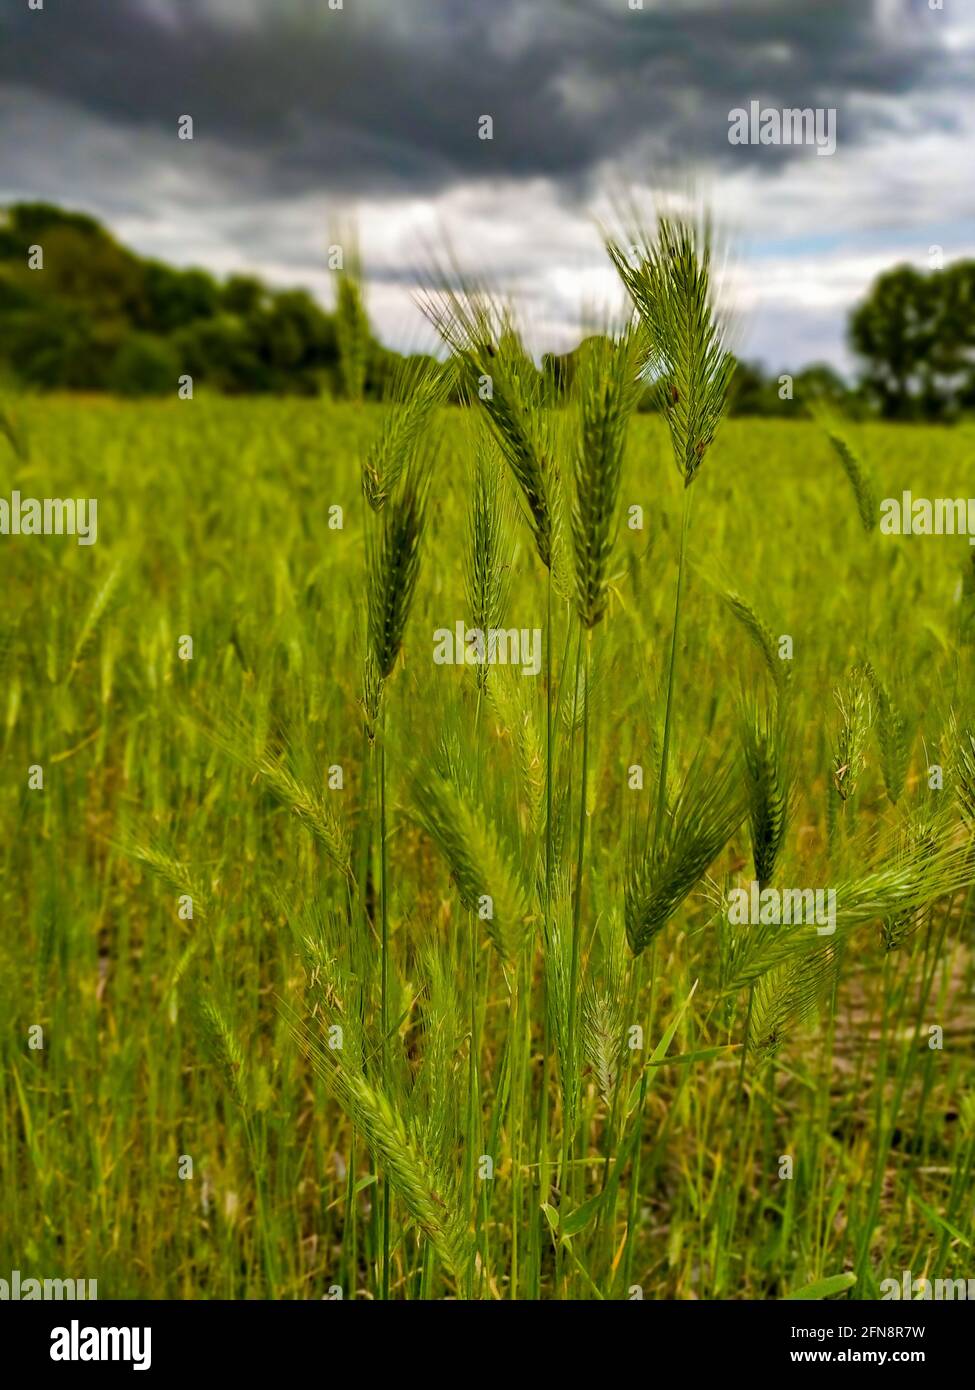 Menacing stormy sky over a field of green wheat Stock Photo